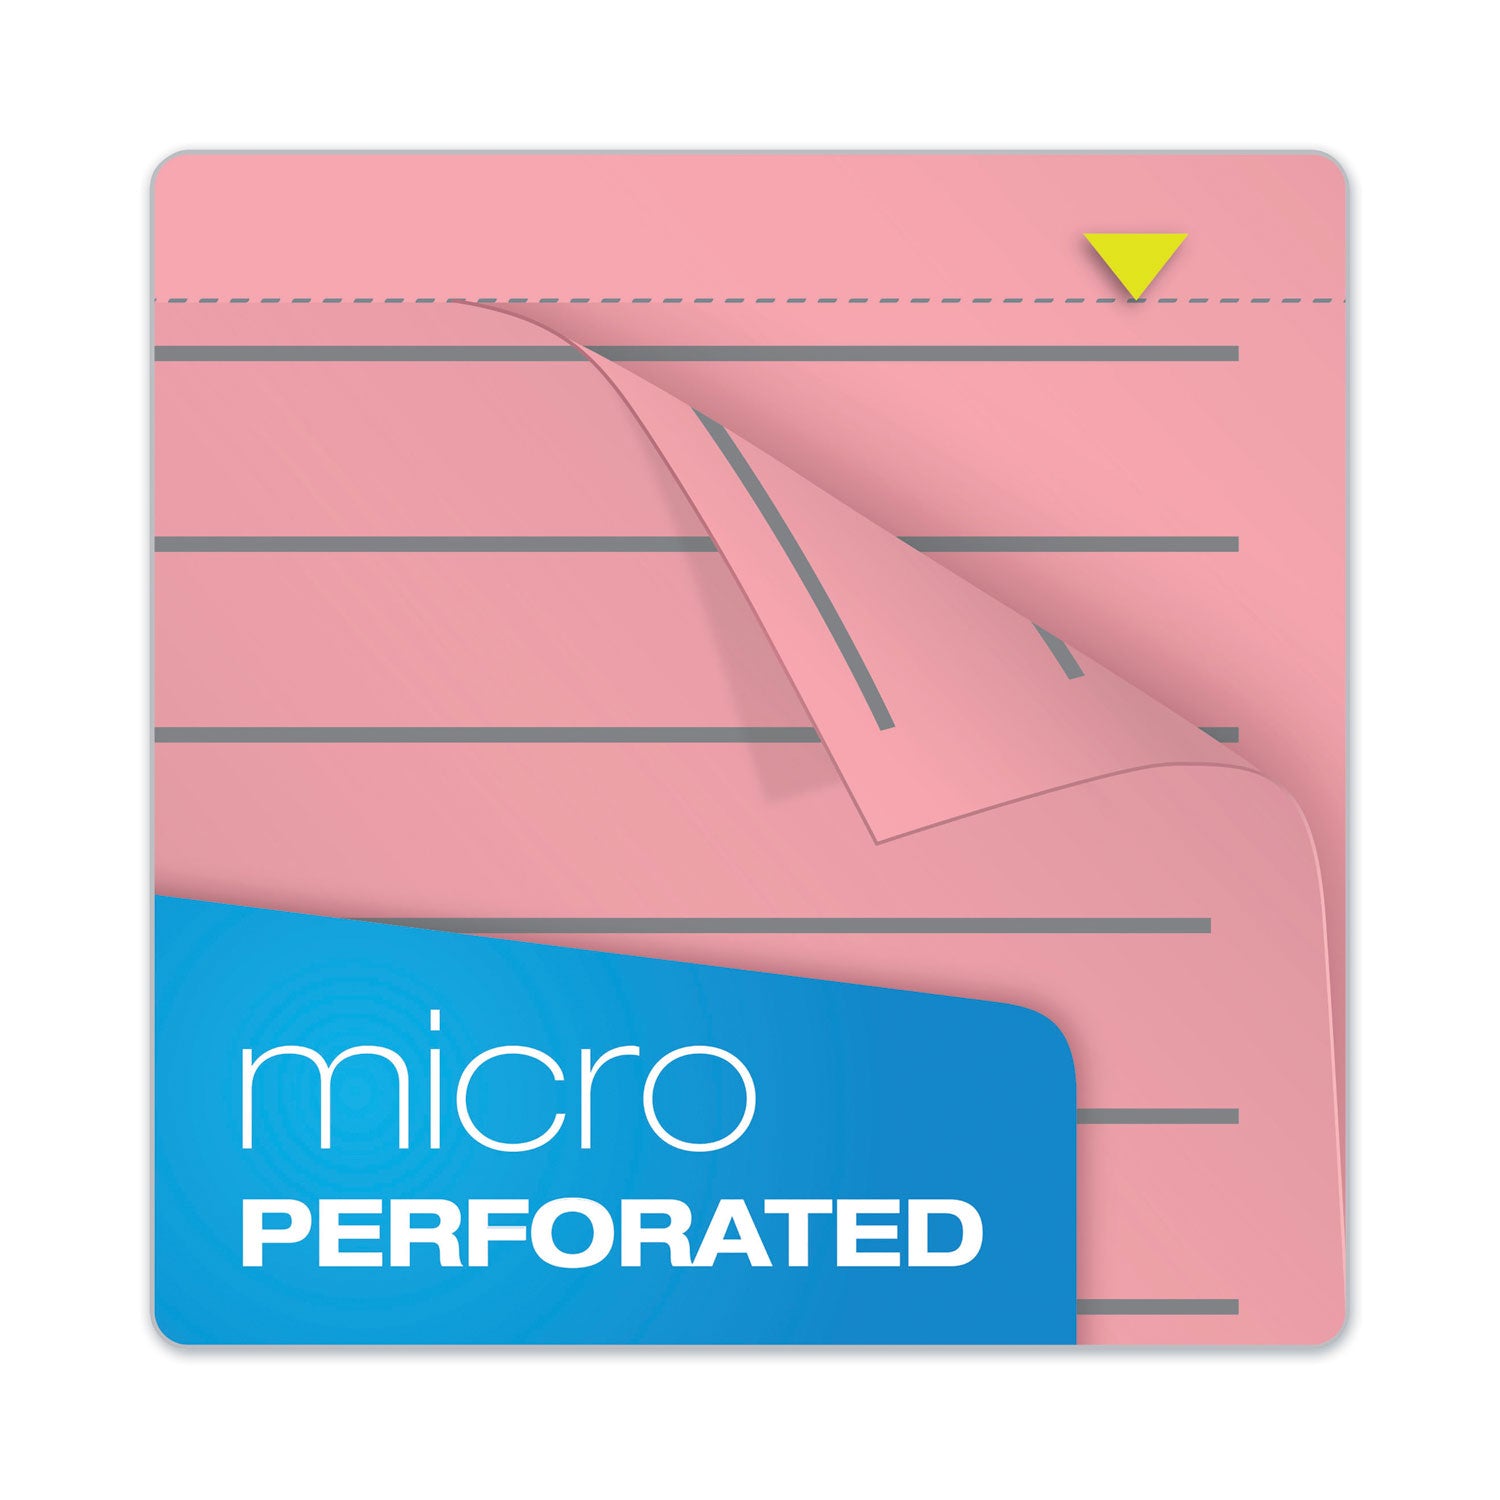 Prism Steno Pads, Gregg Rule, Pink Cover, 80 Pink 6 x 9 Sheets, 4/Pack - 